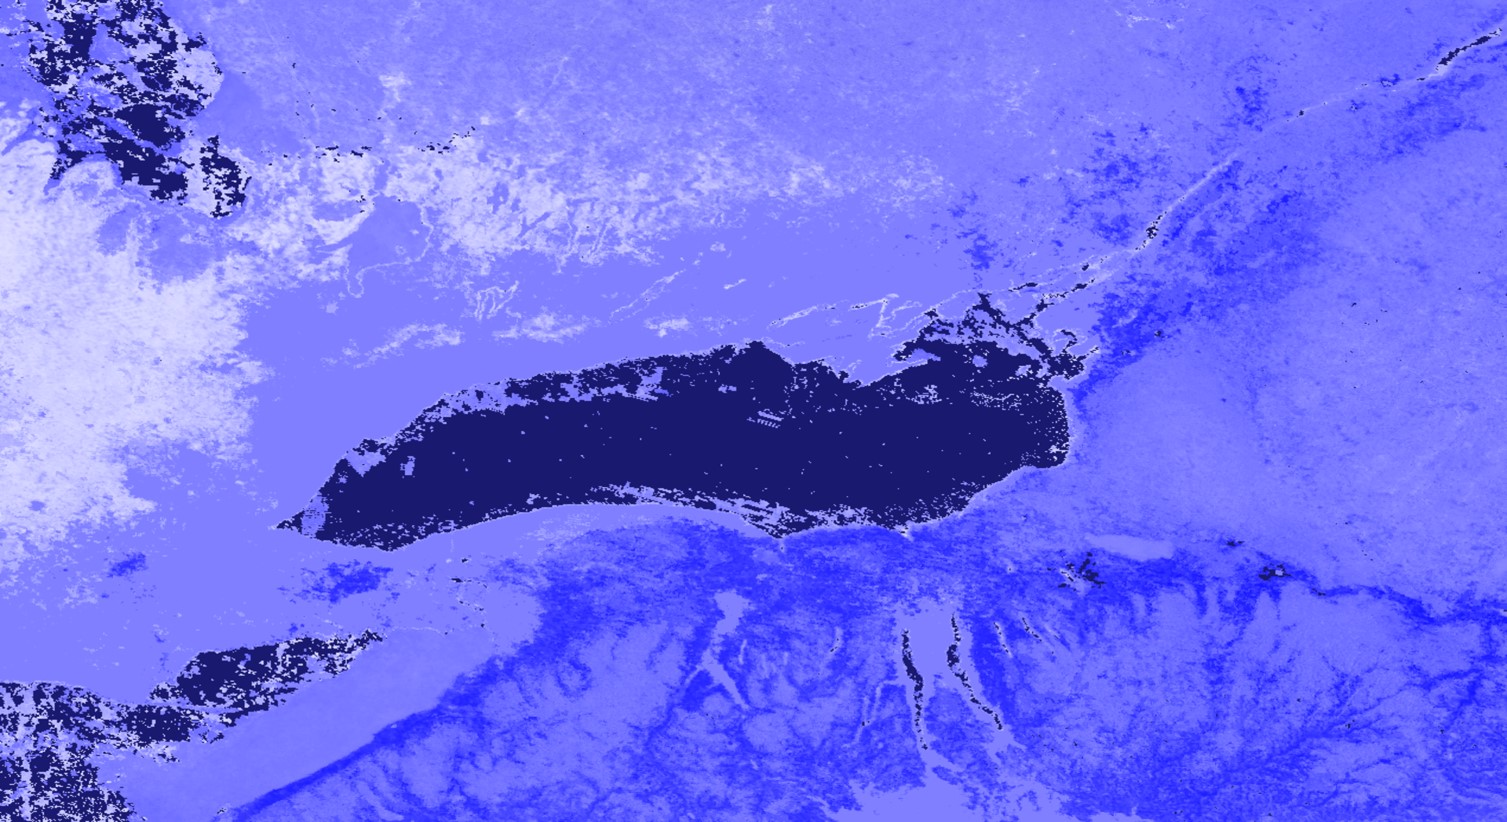 Derived from Aqua and Terra MODIS data, this image shows the difference between the Normalized Difference Snow Index (NDSI) in March 2017 compared to the median NDSI in March from 2000 to 2018 surrounding Lake Ontario. Light blue areas received less snow than usual, while blue areas received more. Dark blue represents bodies of water. By increasing awareness of variables that contribute to flooding (like snow cover), communities can be better prepared for flood events.